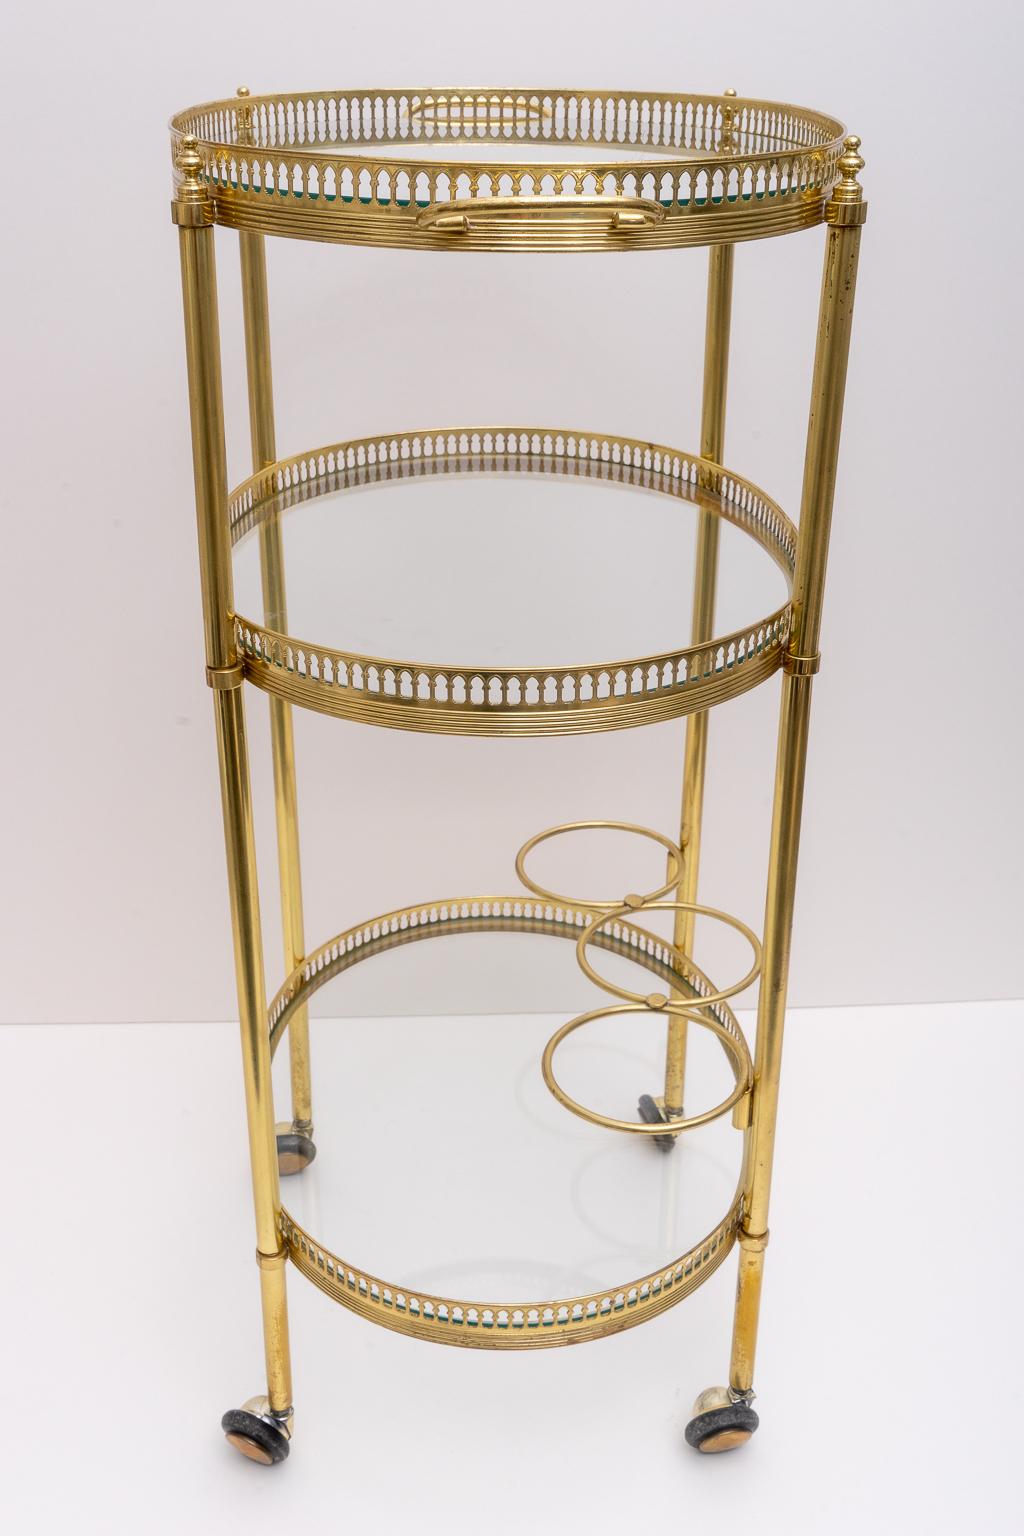 This stylish and chic petit bar cart is very much in the style of pieces created by Maison Jansen and it was purchased in Florence, Italy in the 1970s.

Note:  30